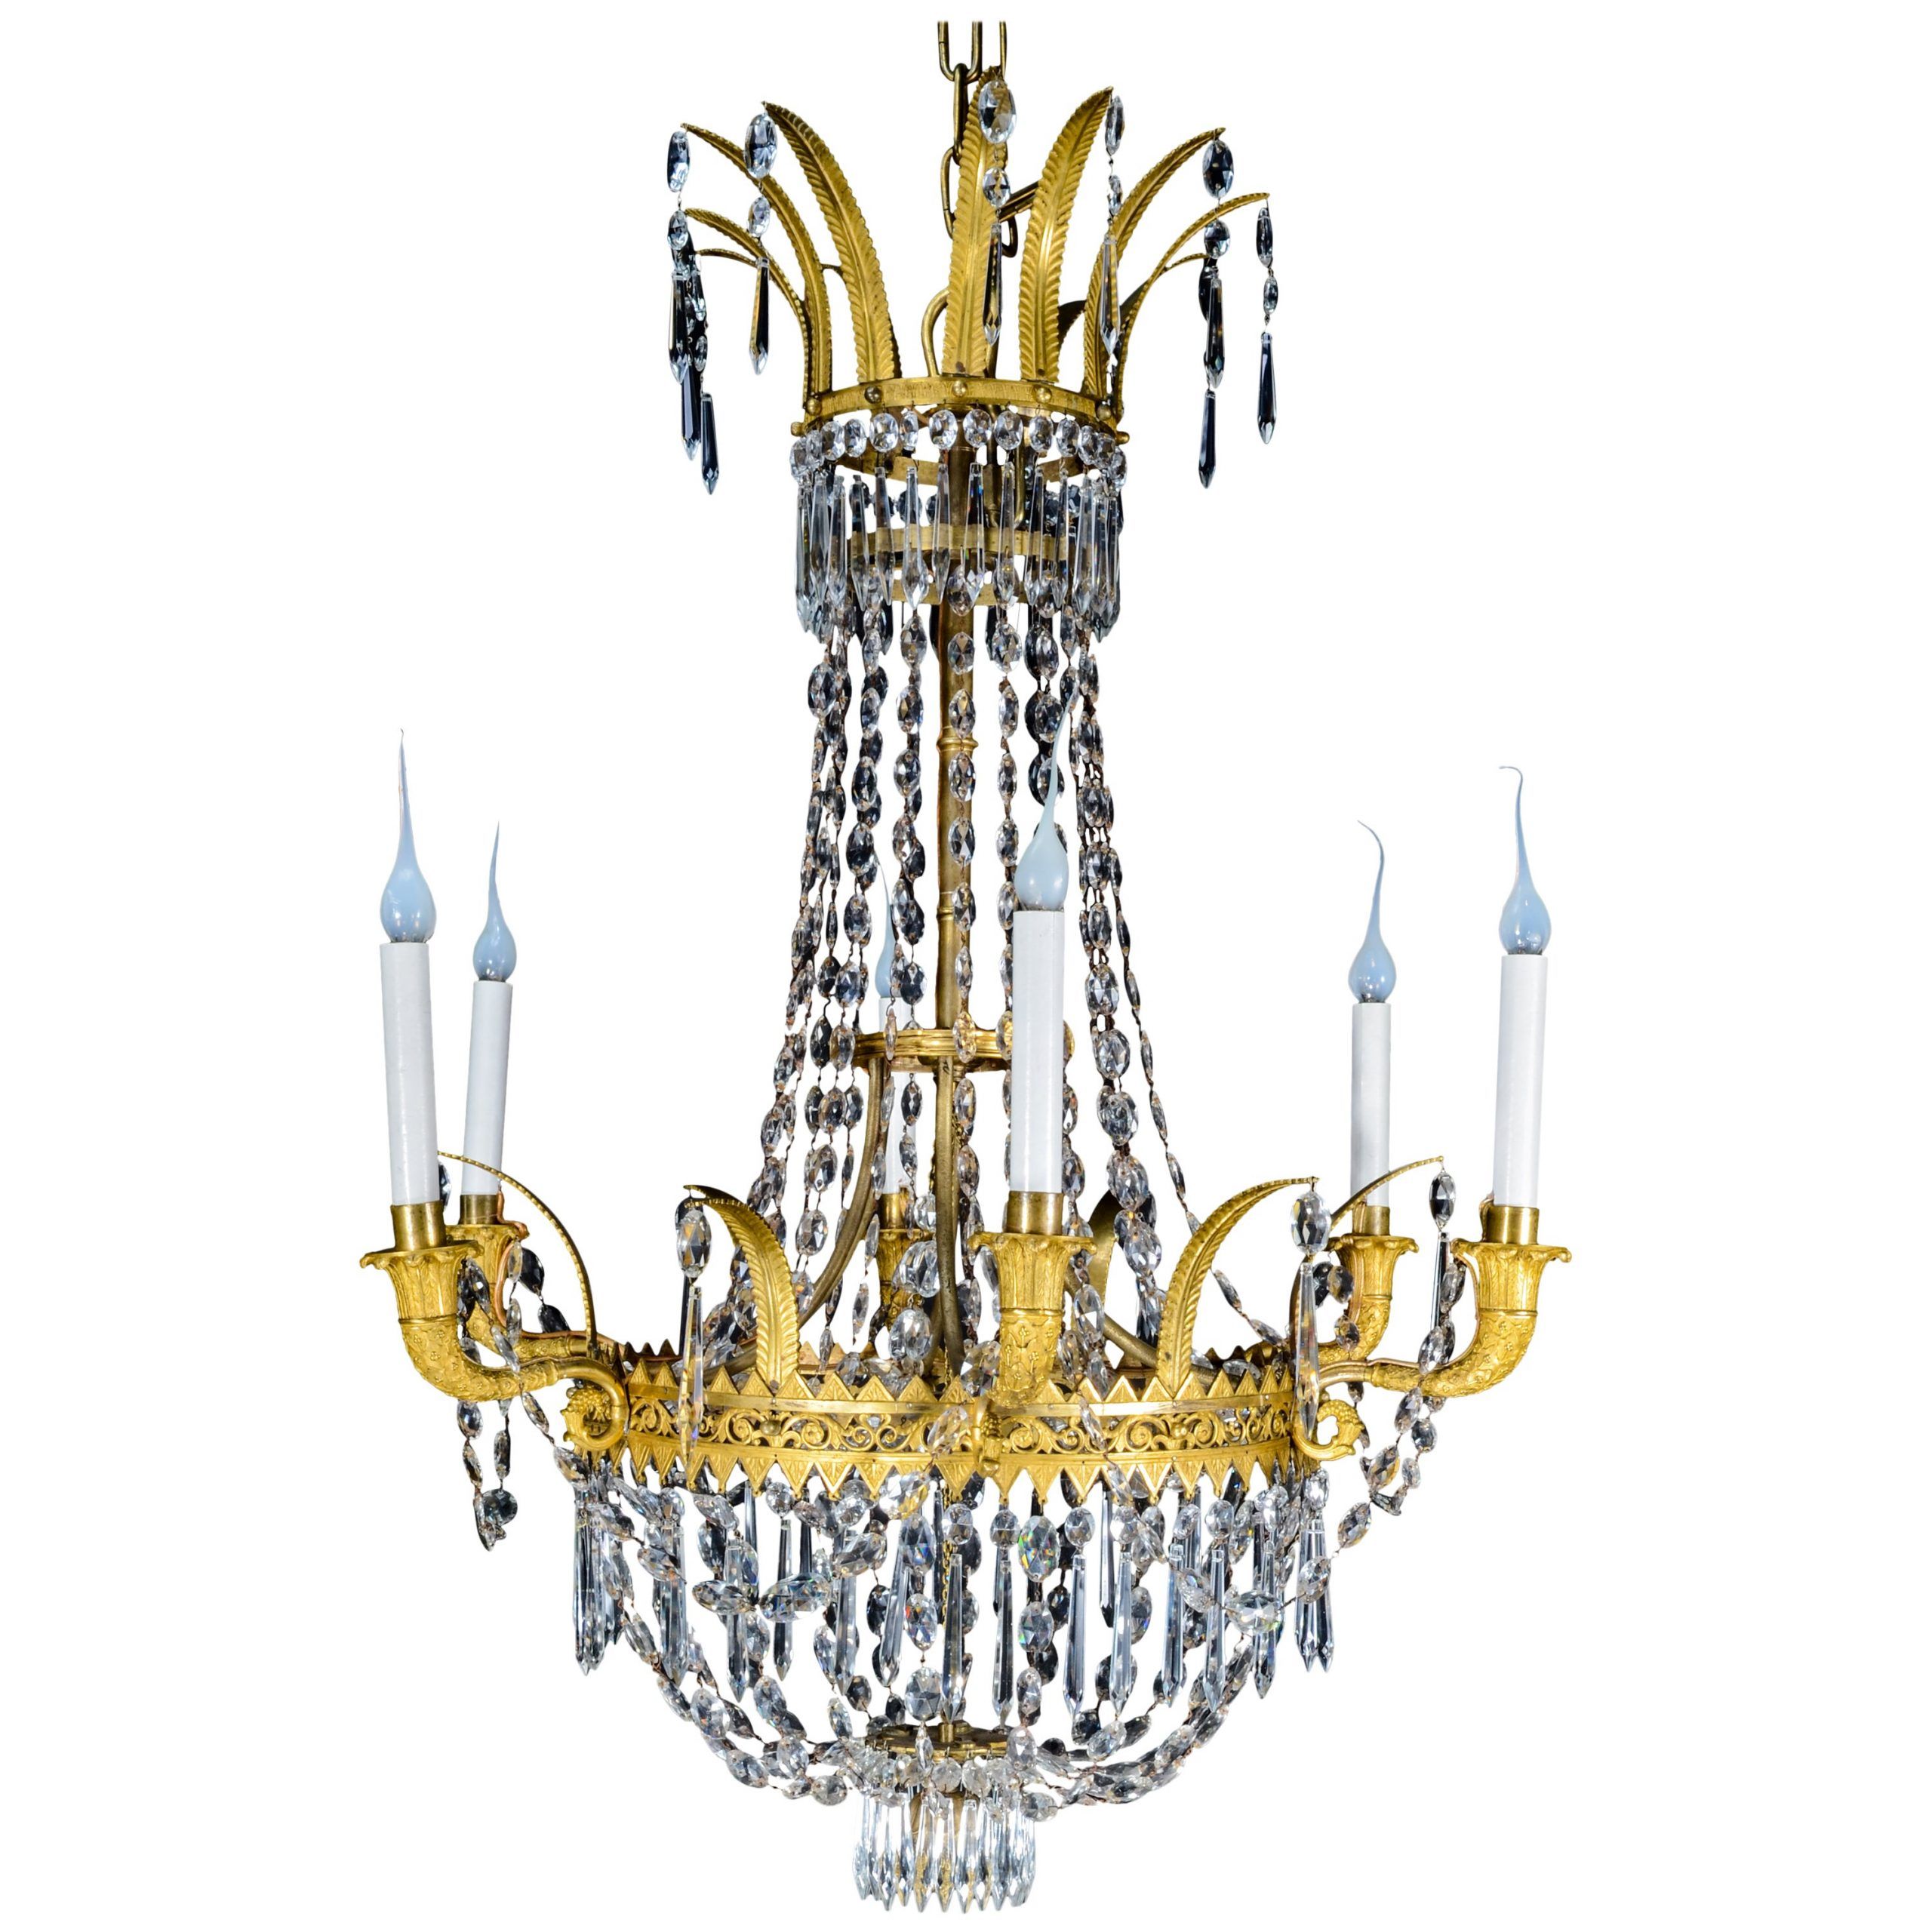 Roman Bronze And Crystal Chandeliers Inside Recent Gilt Bronze And Crystal Empire Style Chandelier For Sale (View 2 of 15)